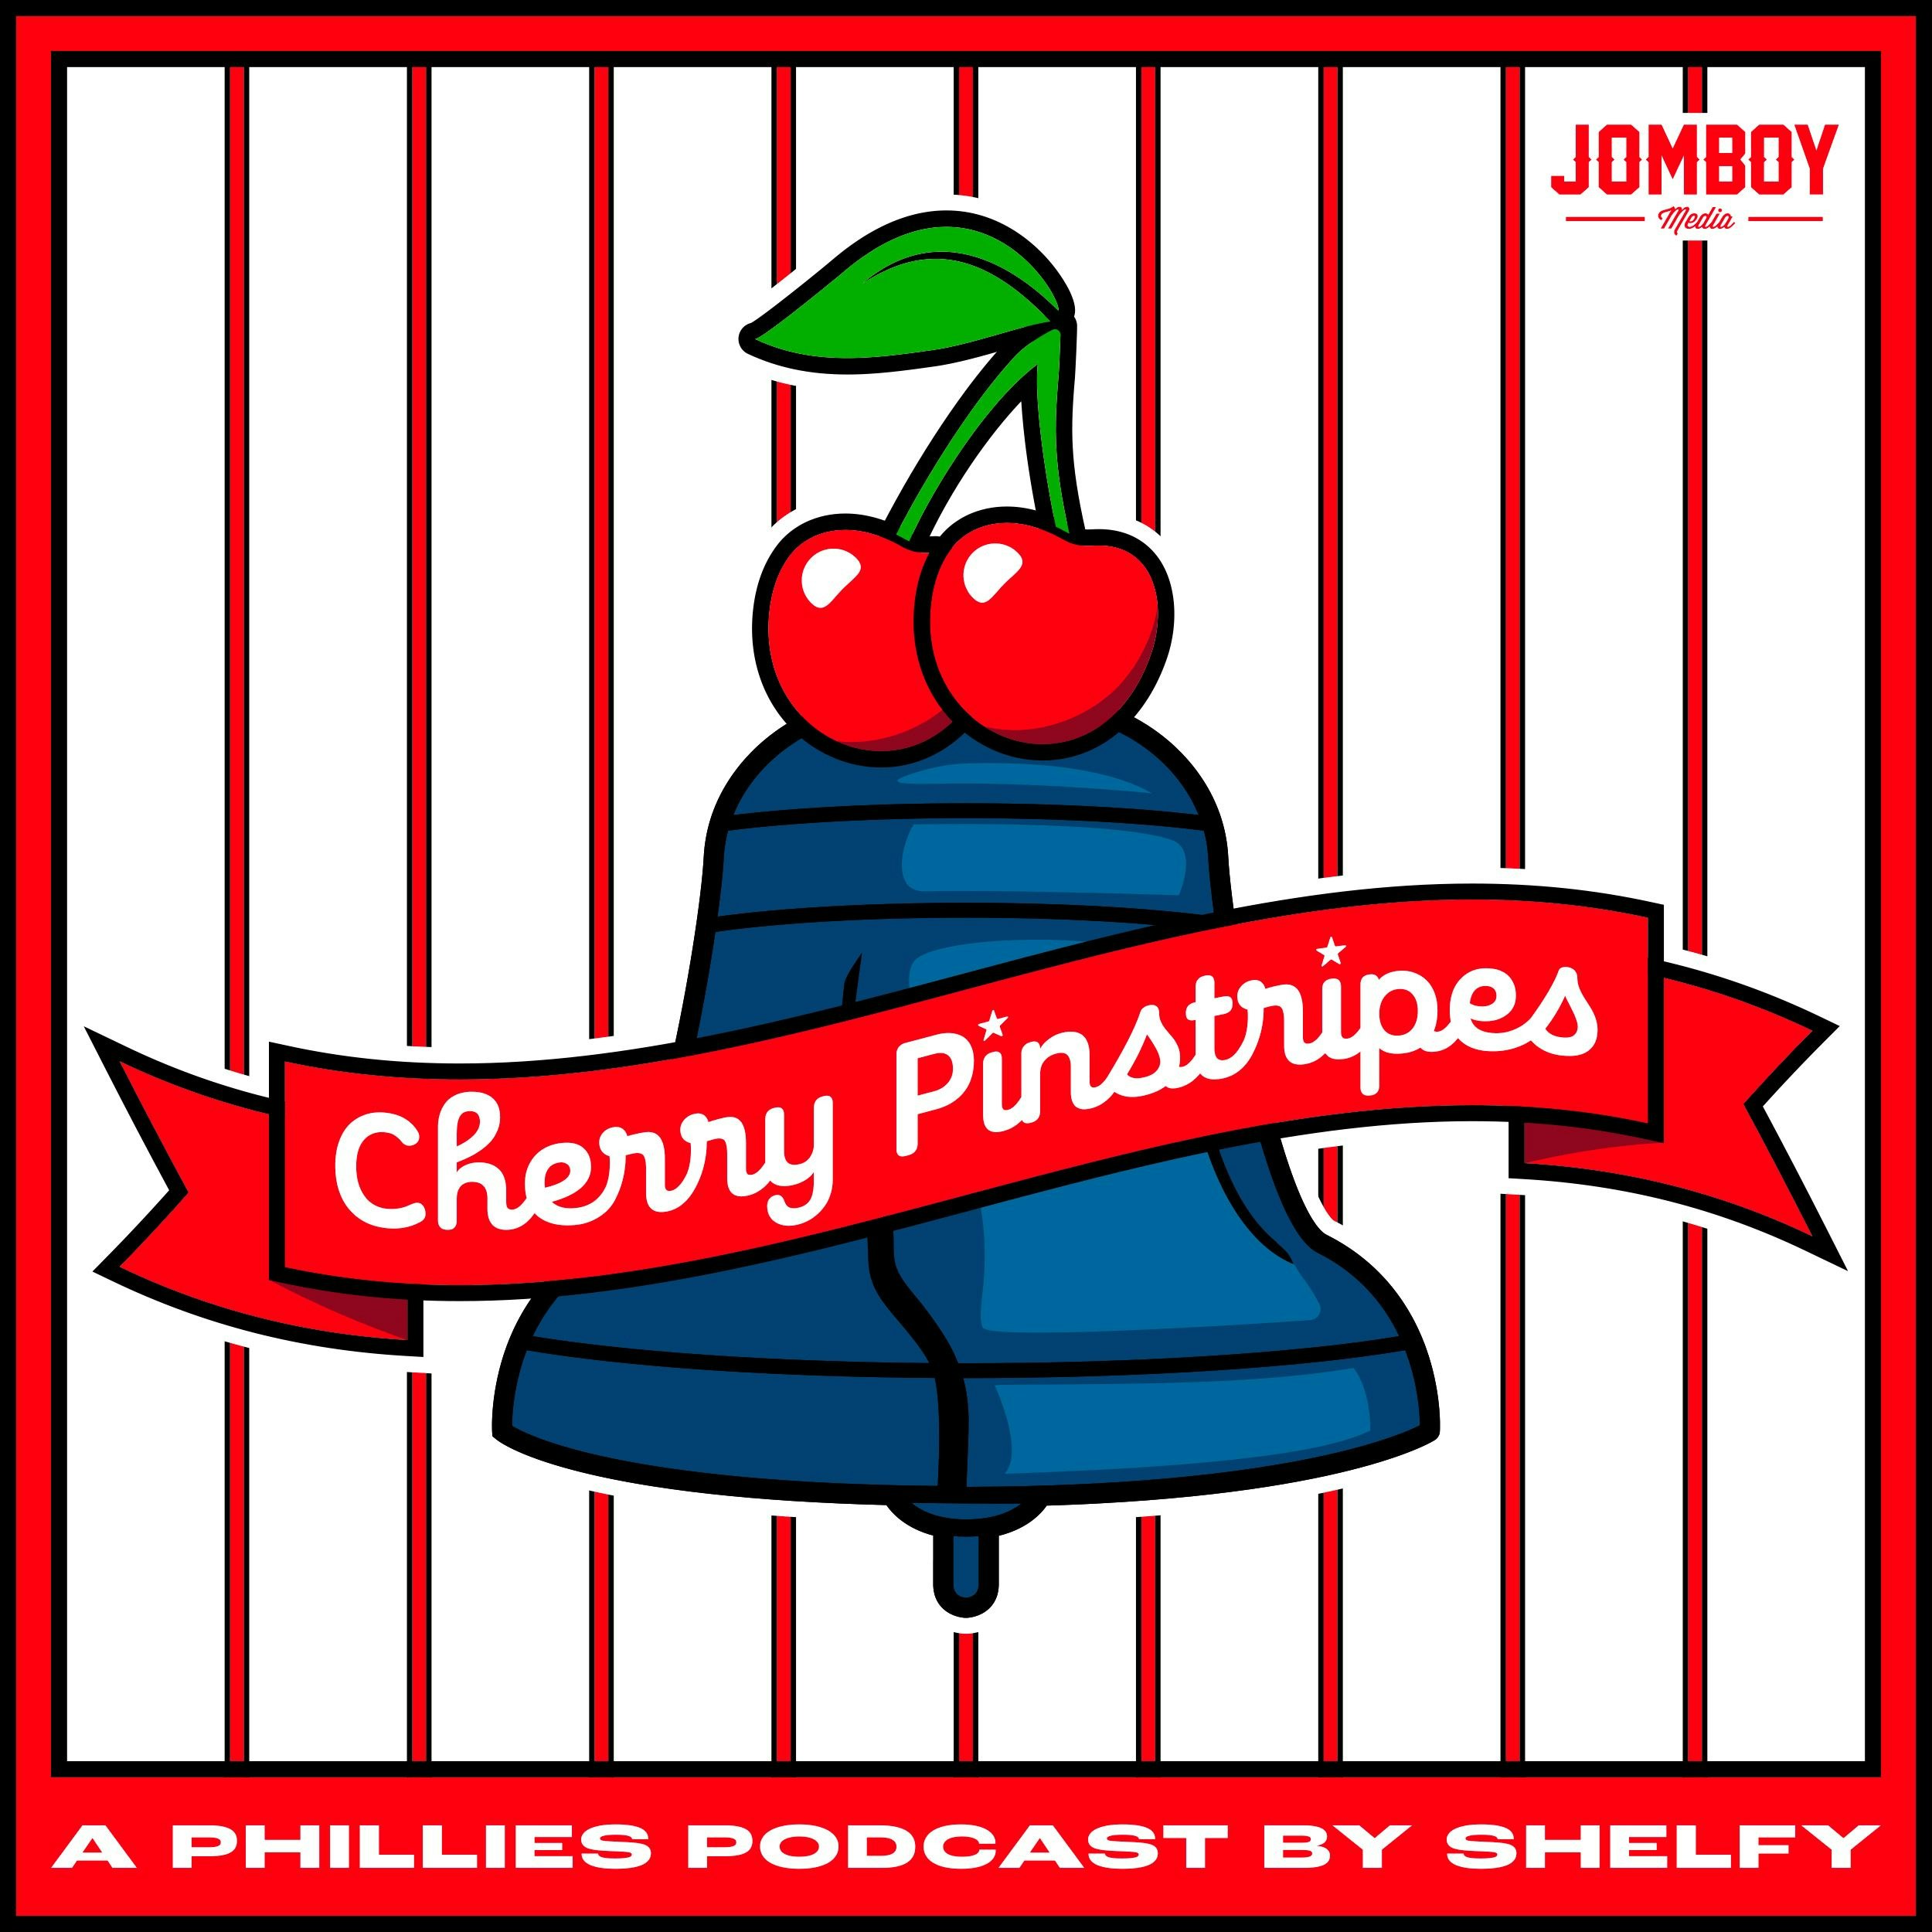 Cherry Pinstripes (Phillies Podcast)